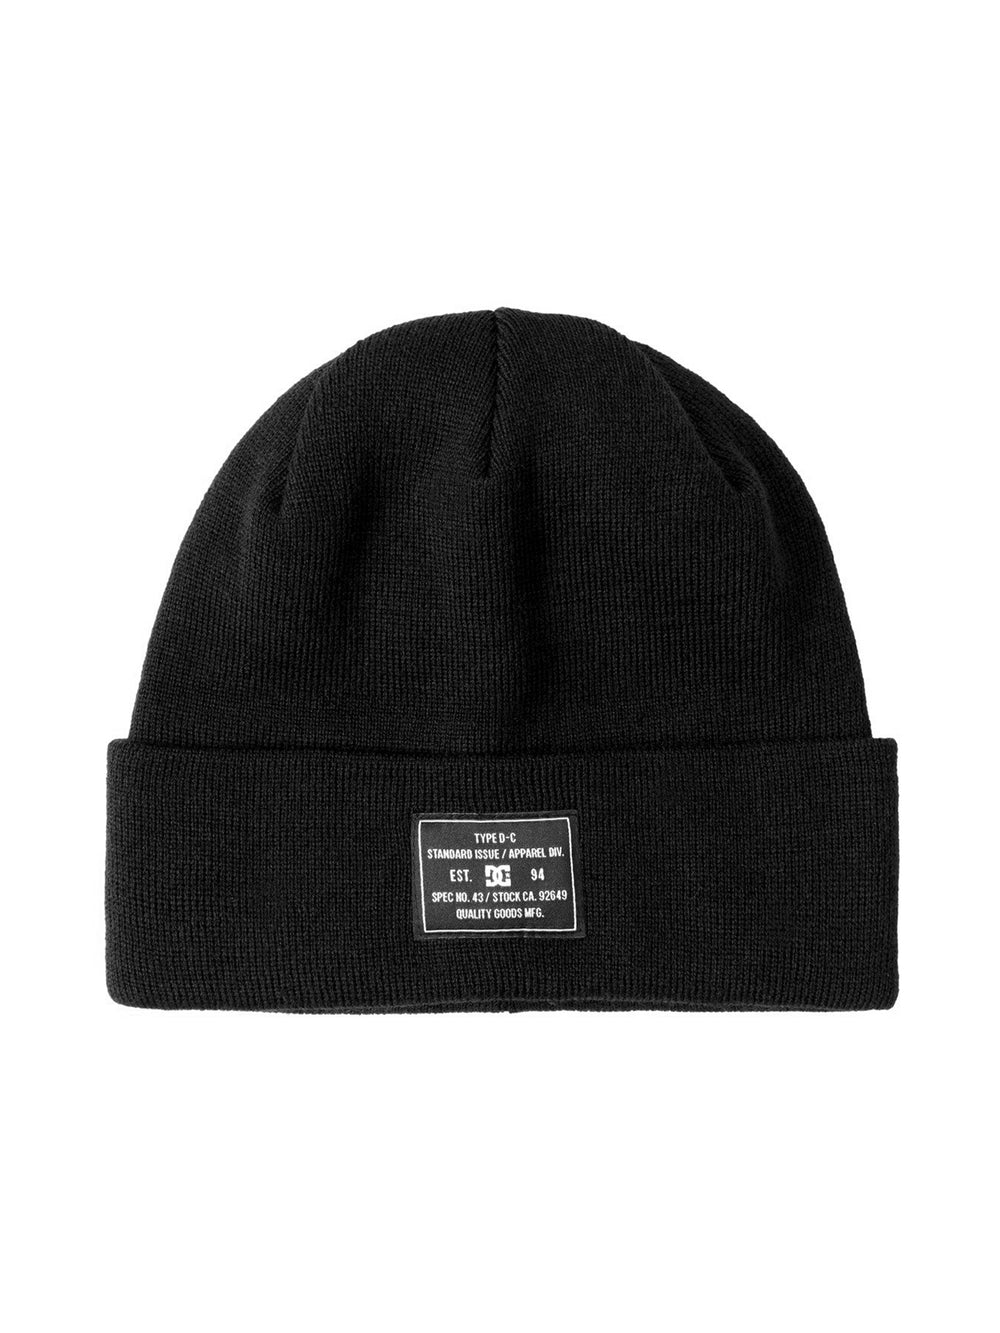 DC SHOES FRONTLINE BEANIE - BLACK - CLEARANCE